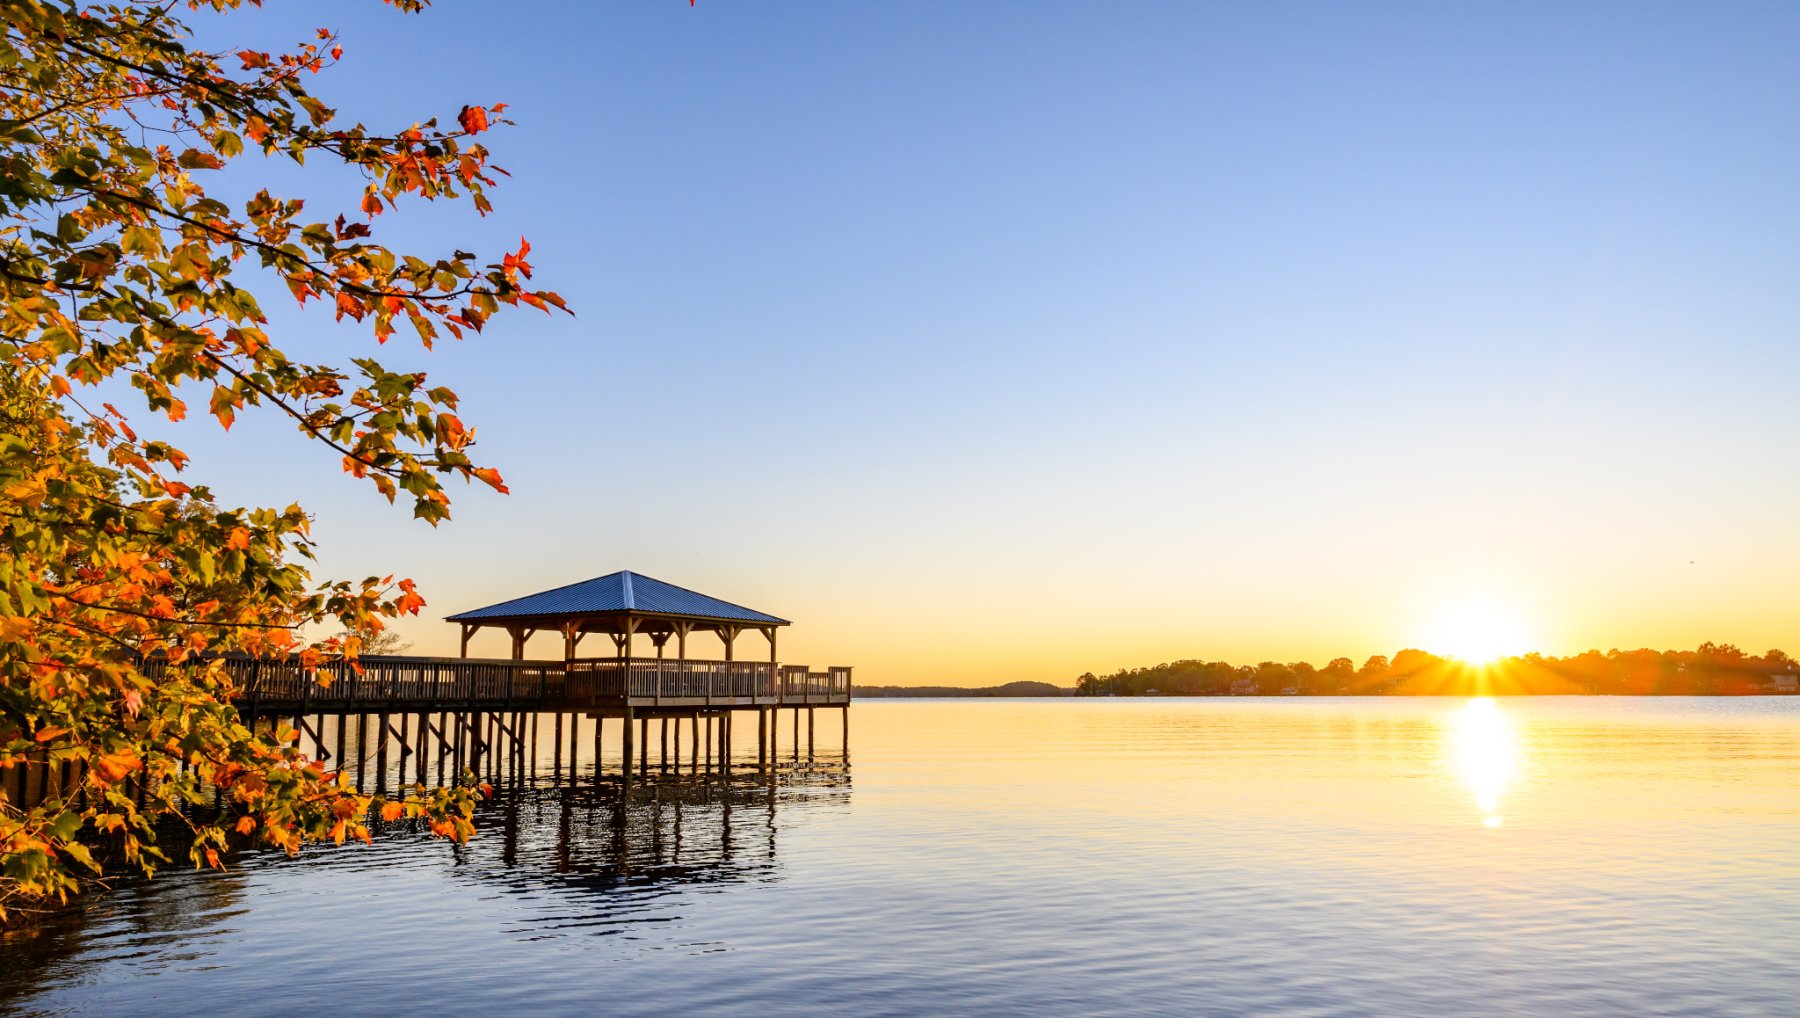 Pier on Lake Norman with sun setting behind trees on horizon in background with fall foliage in foreground